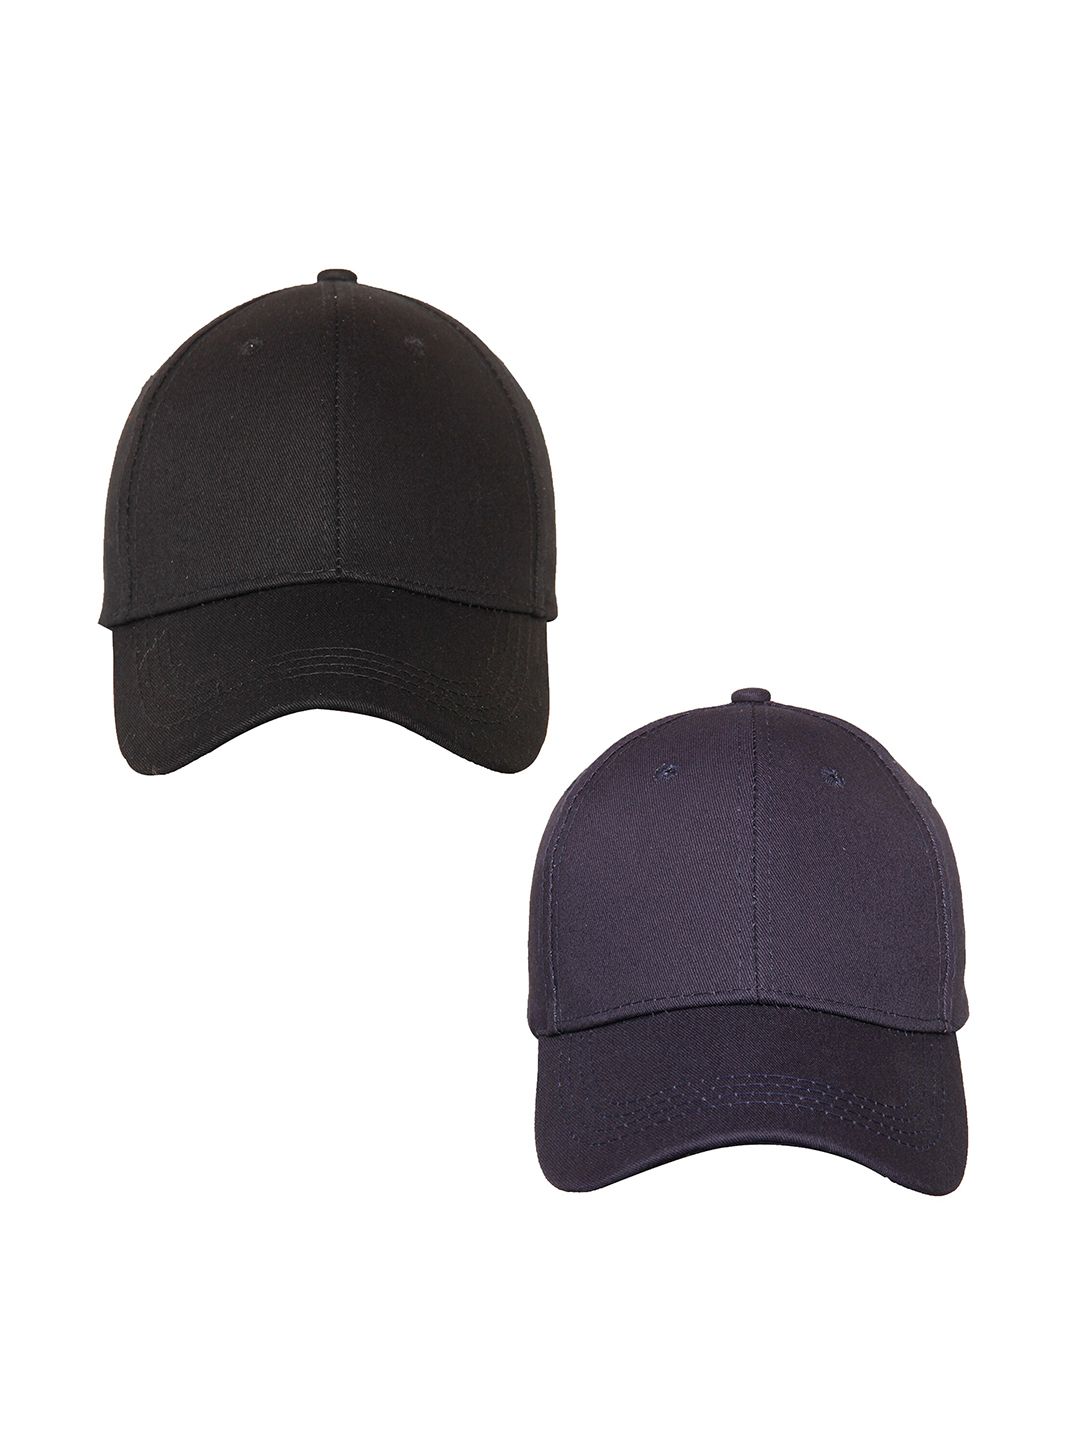 FabSeasons Pack of 2 Unisex Navy Blue & Black Solid Baseball Cap with Adjustable Buckle Price in India